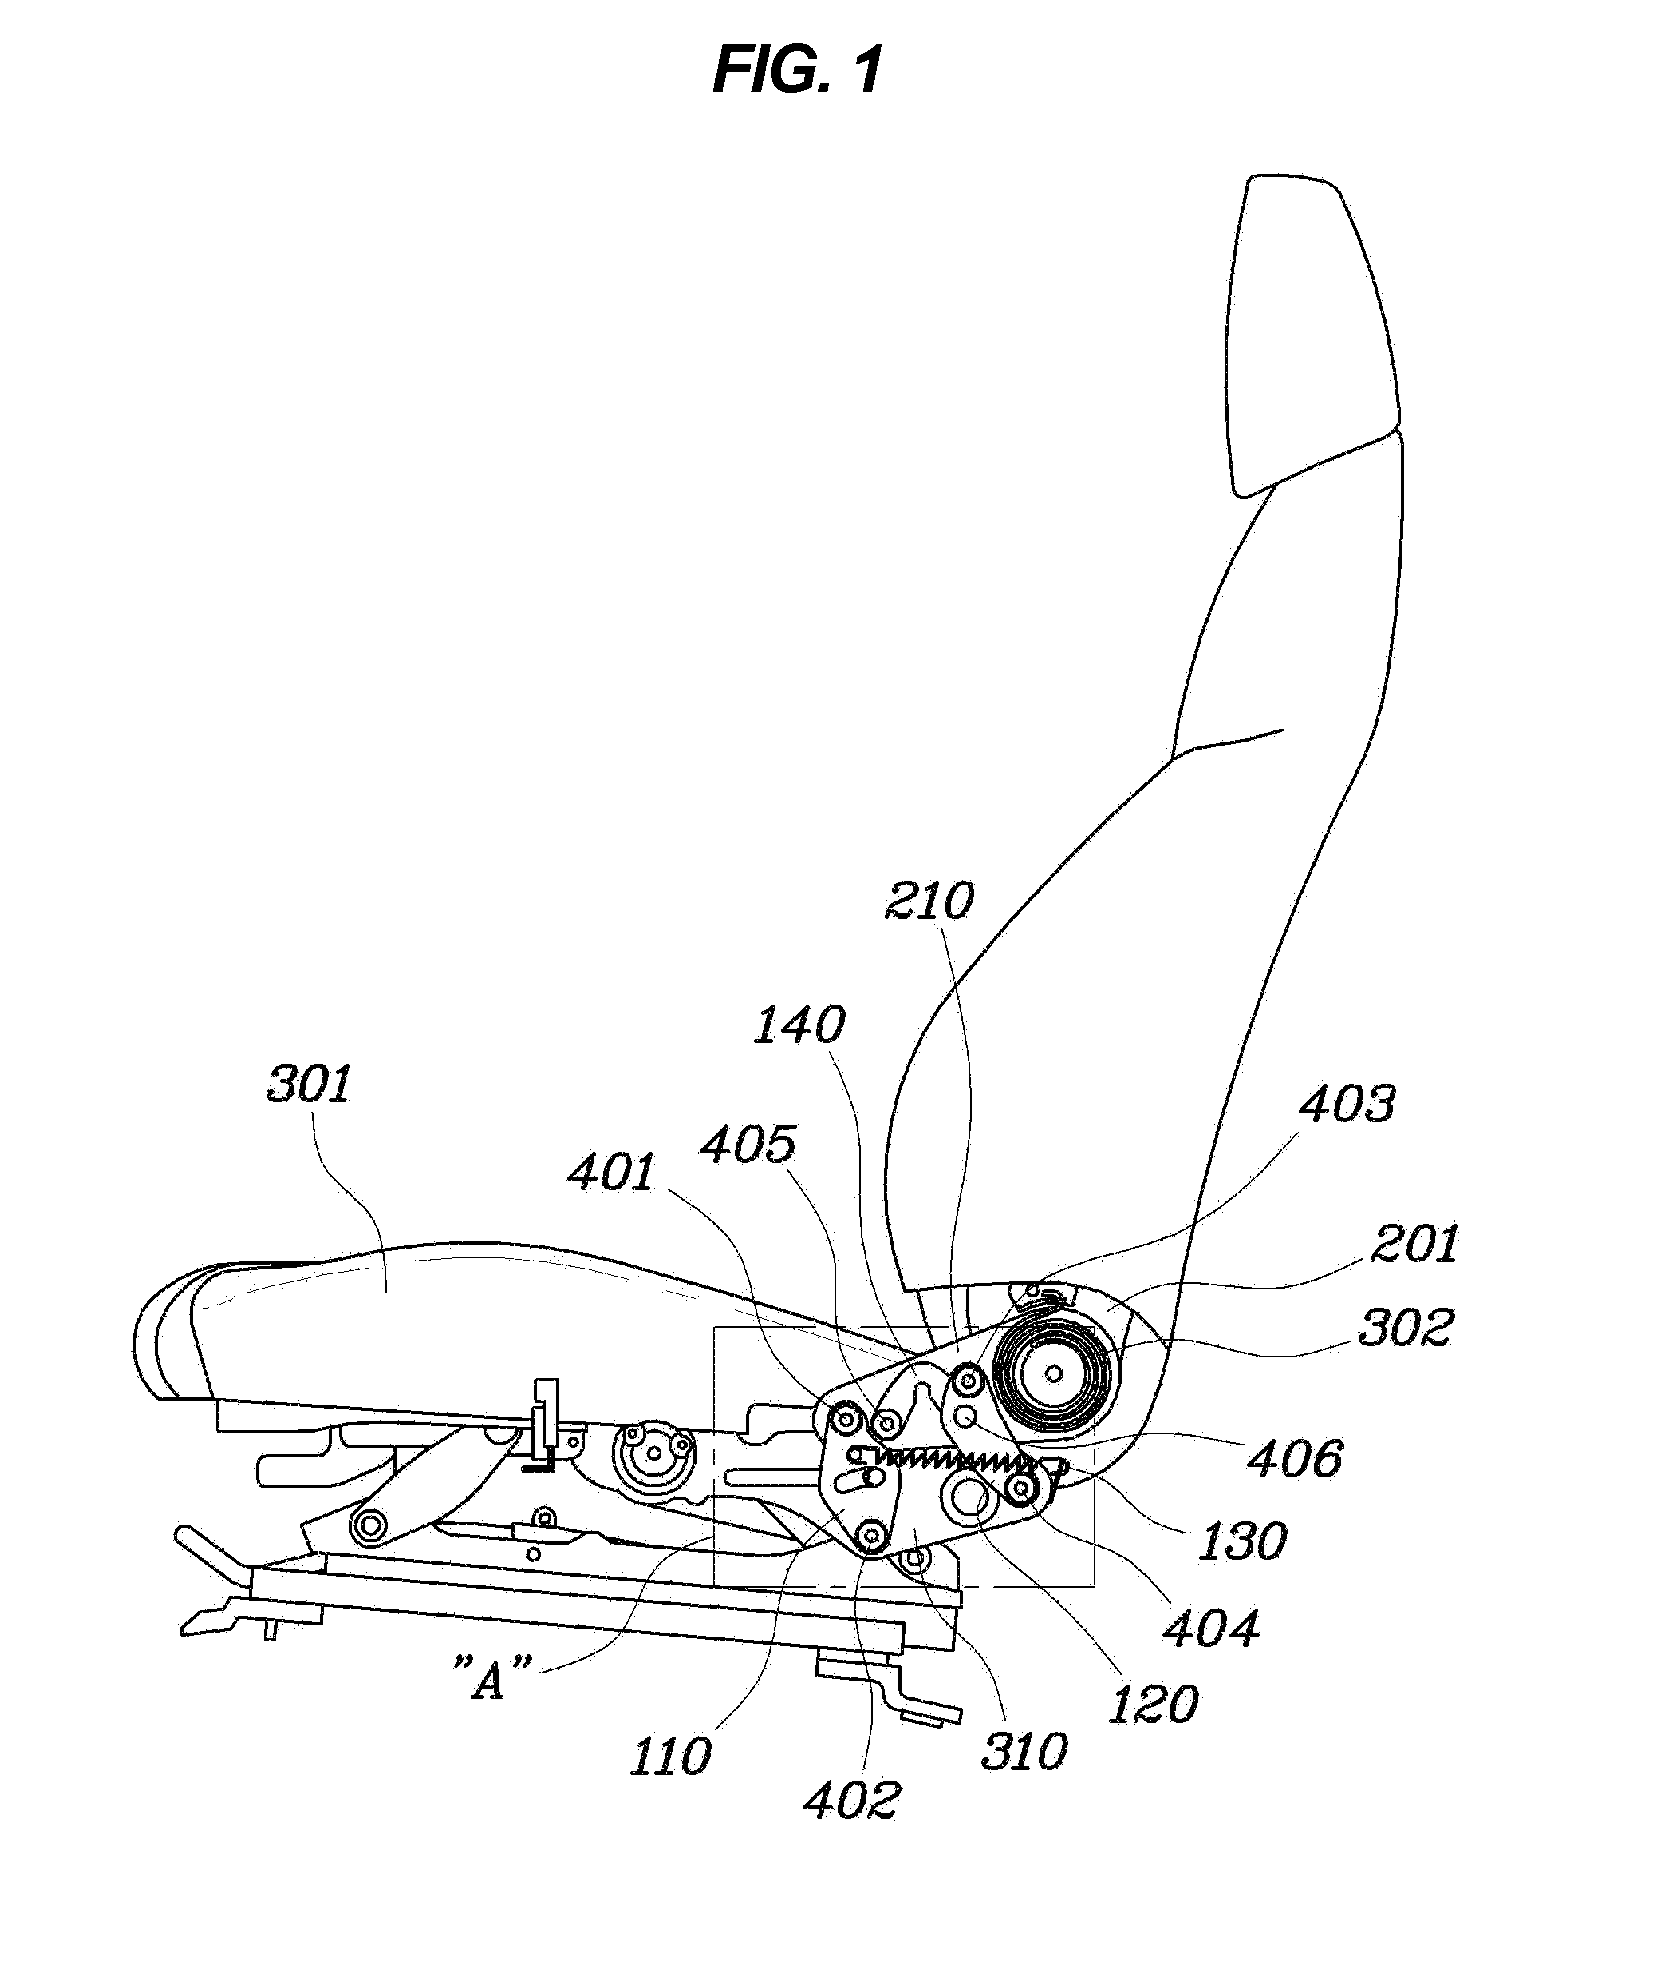 Apparatus for preventing neck injury for use in vehicle seat